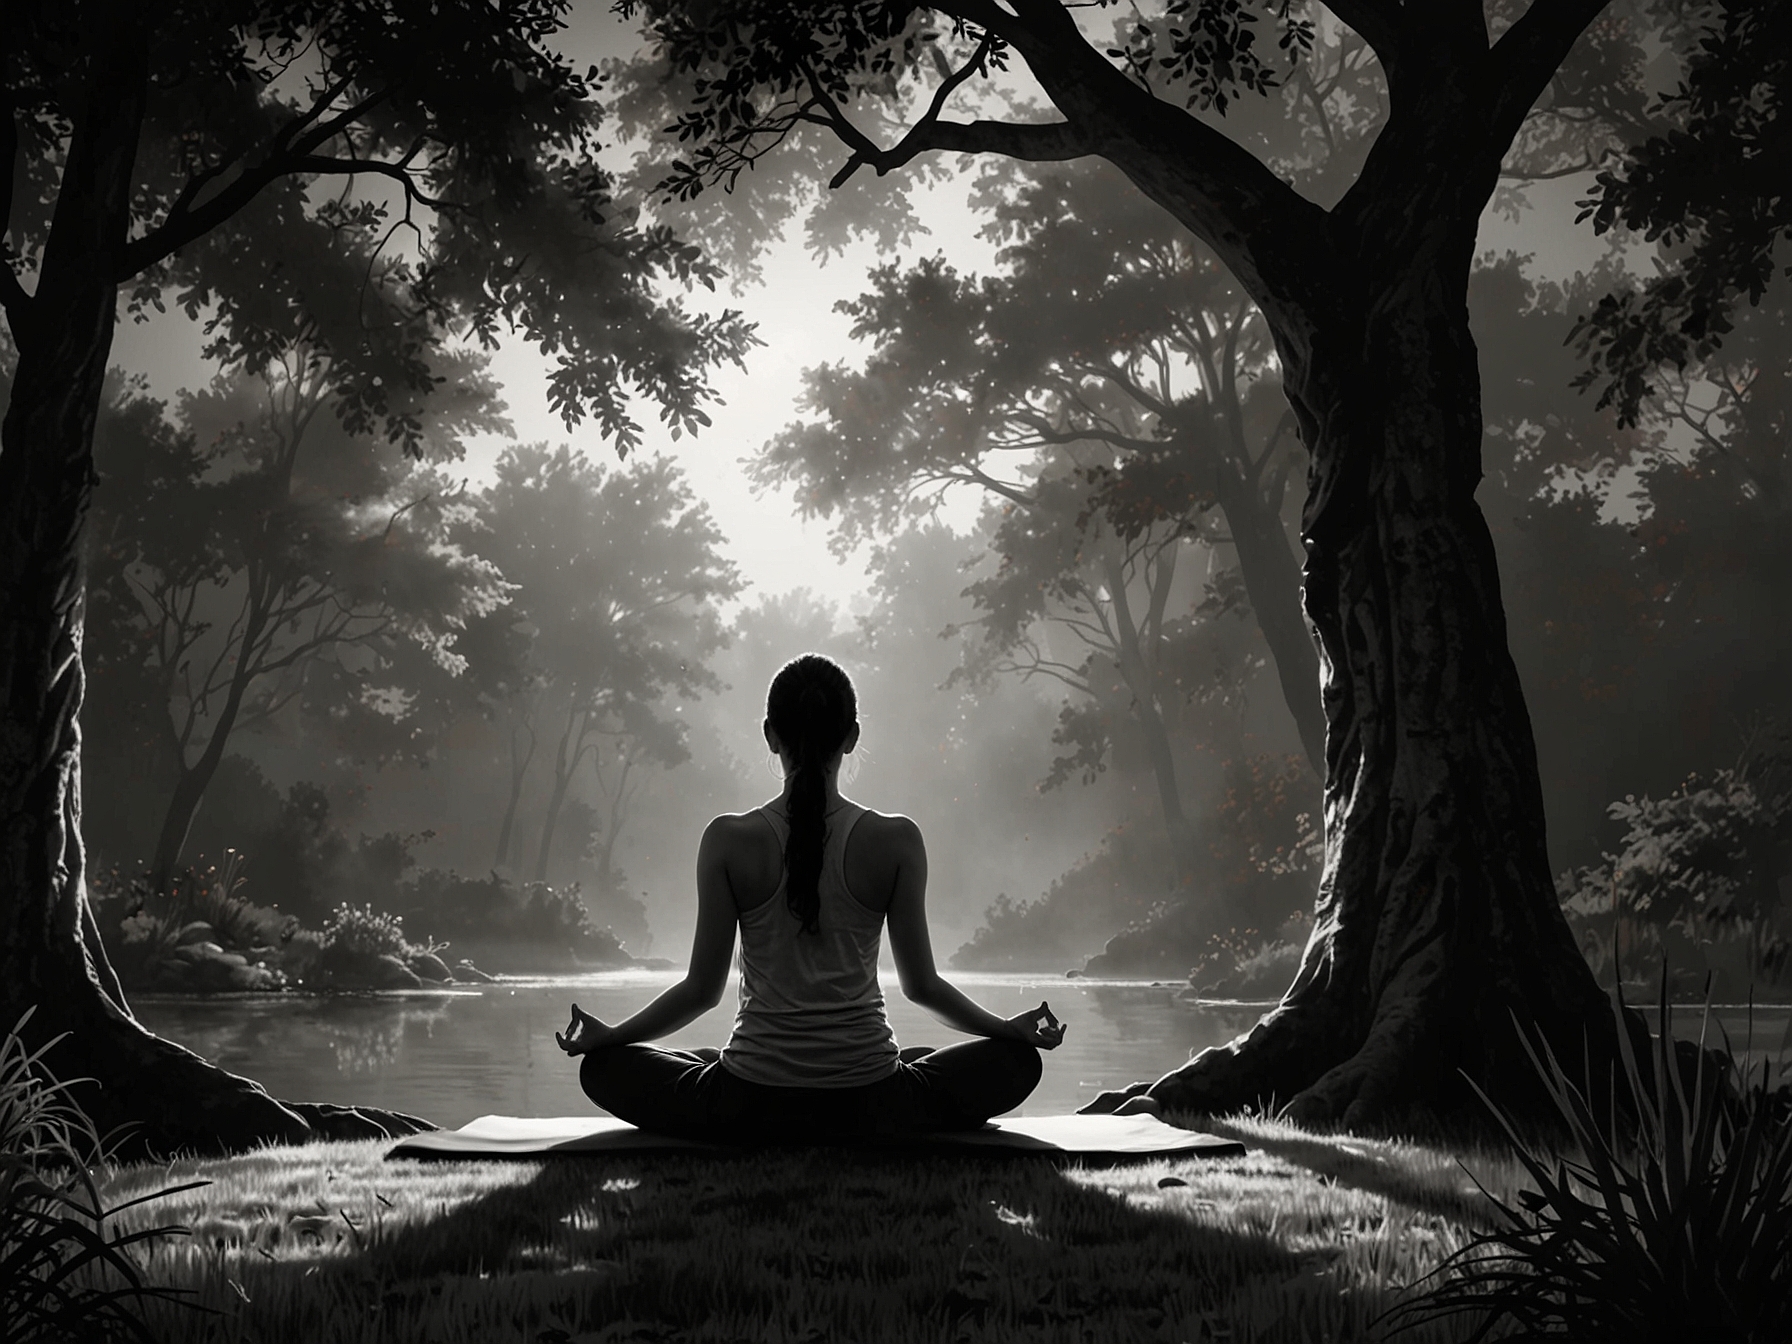 A contrasting image depicting the same person in a serene setting, engaging in therapy and practicing mindfulness activities like yoga, highlighting the journey towards healthier coping mechanisms and emotional healing.